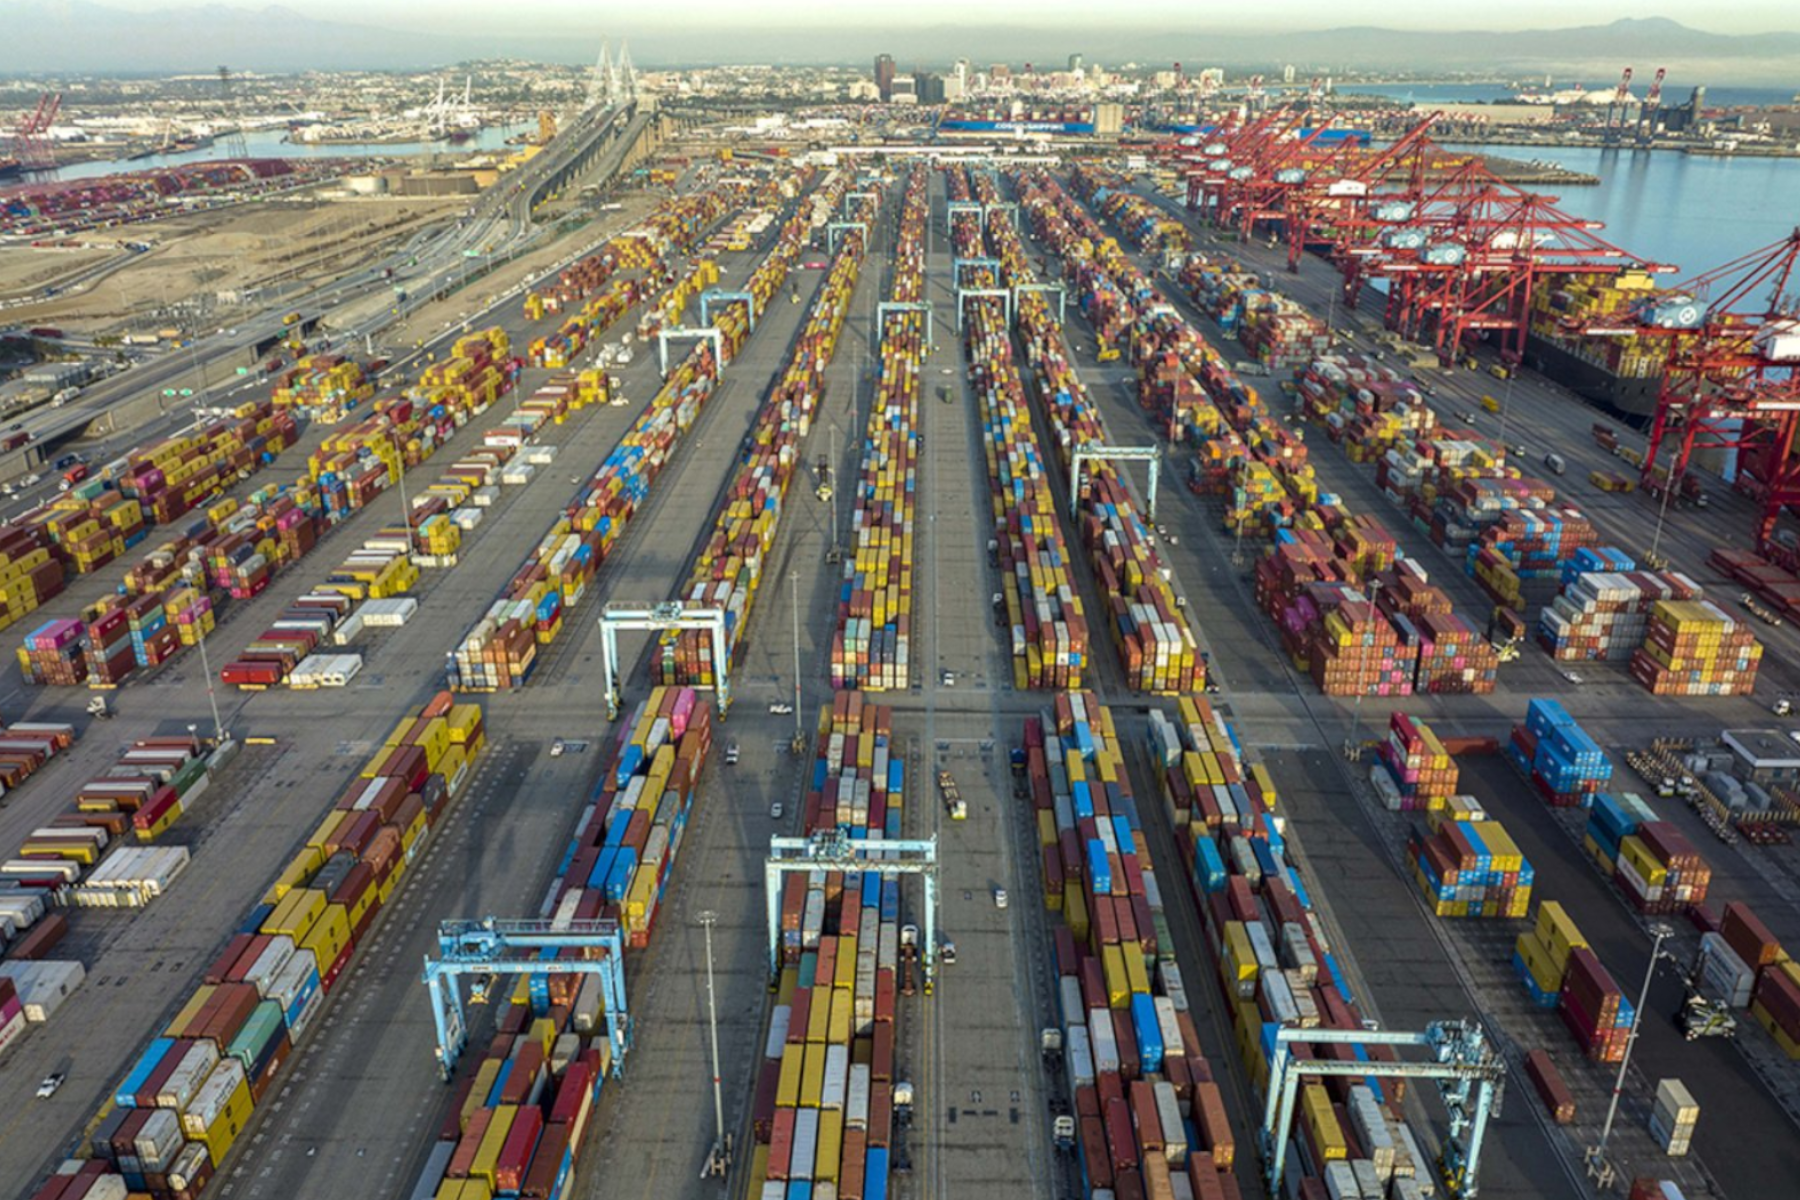 Containers representing global business and transportation